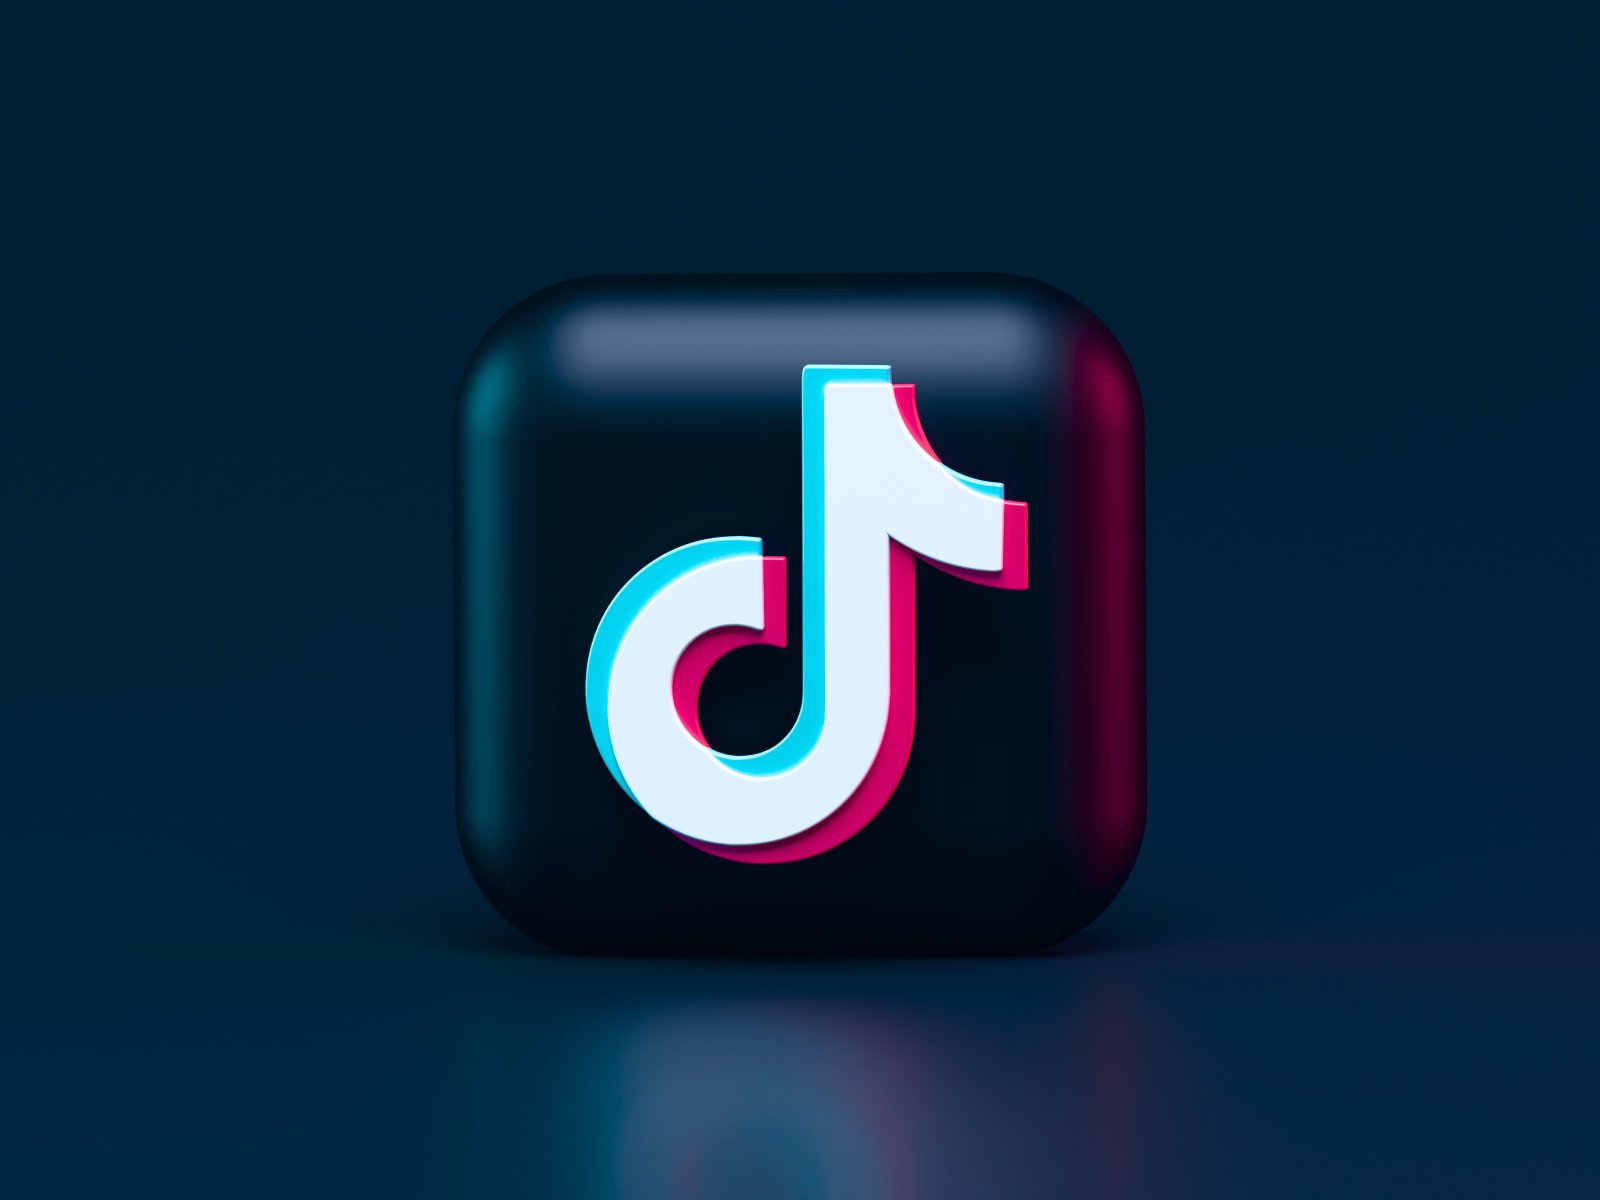 TikTok will increase transparency for researchers